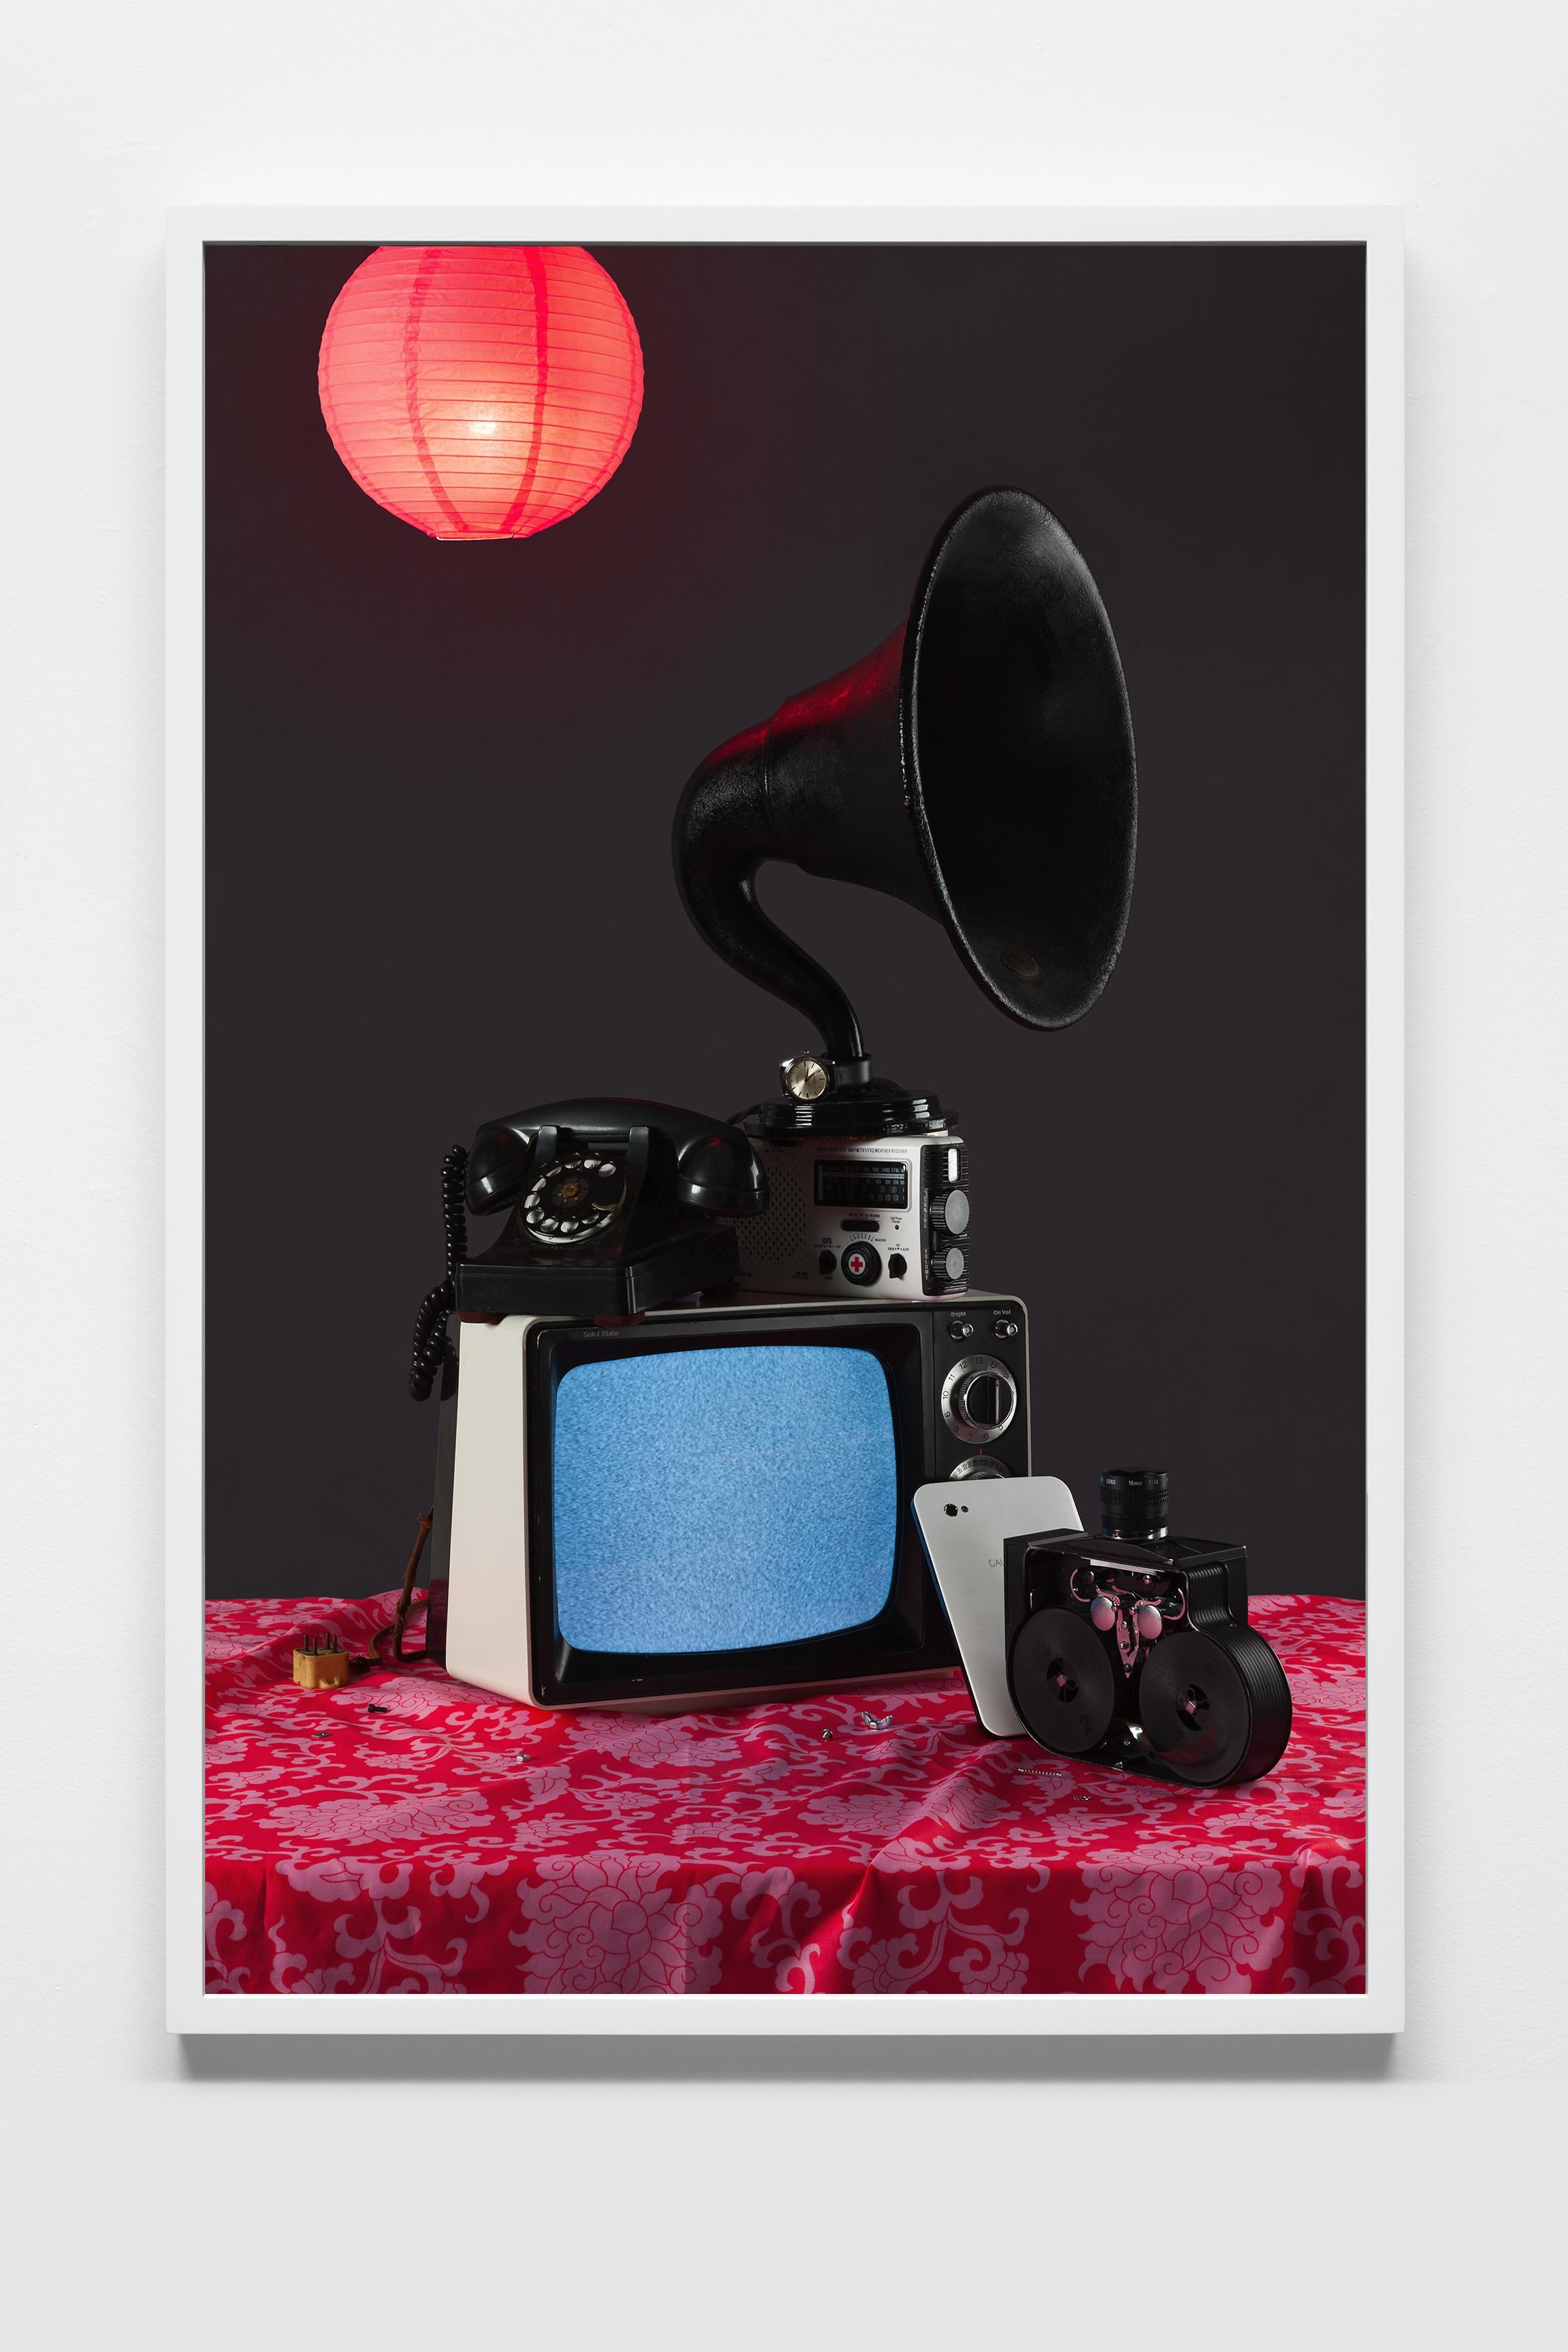 My “Tech Vanitas” photography series embraces our love for beautifully designed, vintage machines and anxiety over new technology. My still lifes clearly reference 17th Century Dutch vanitas paintings and their air of craft guilds, international